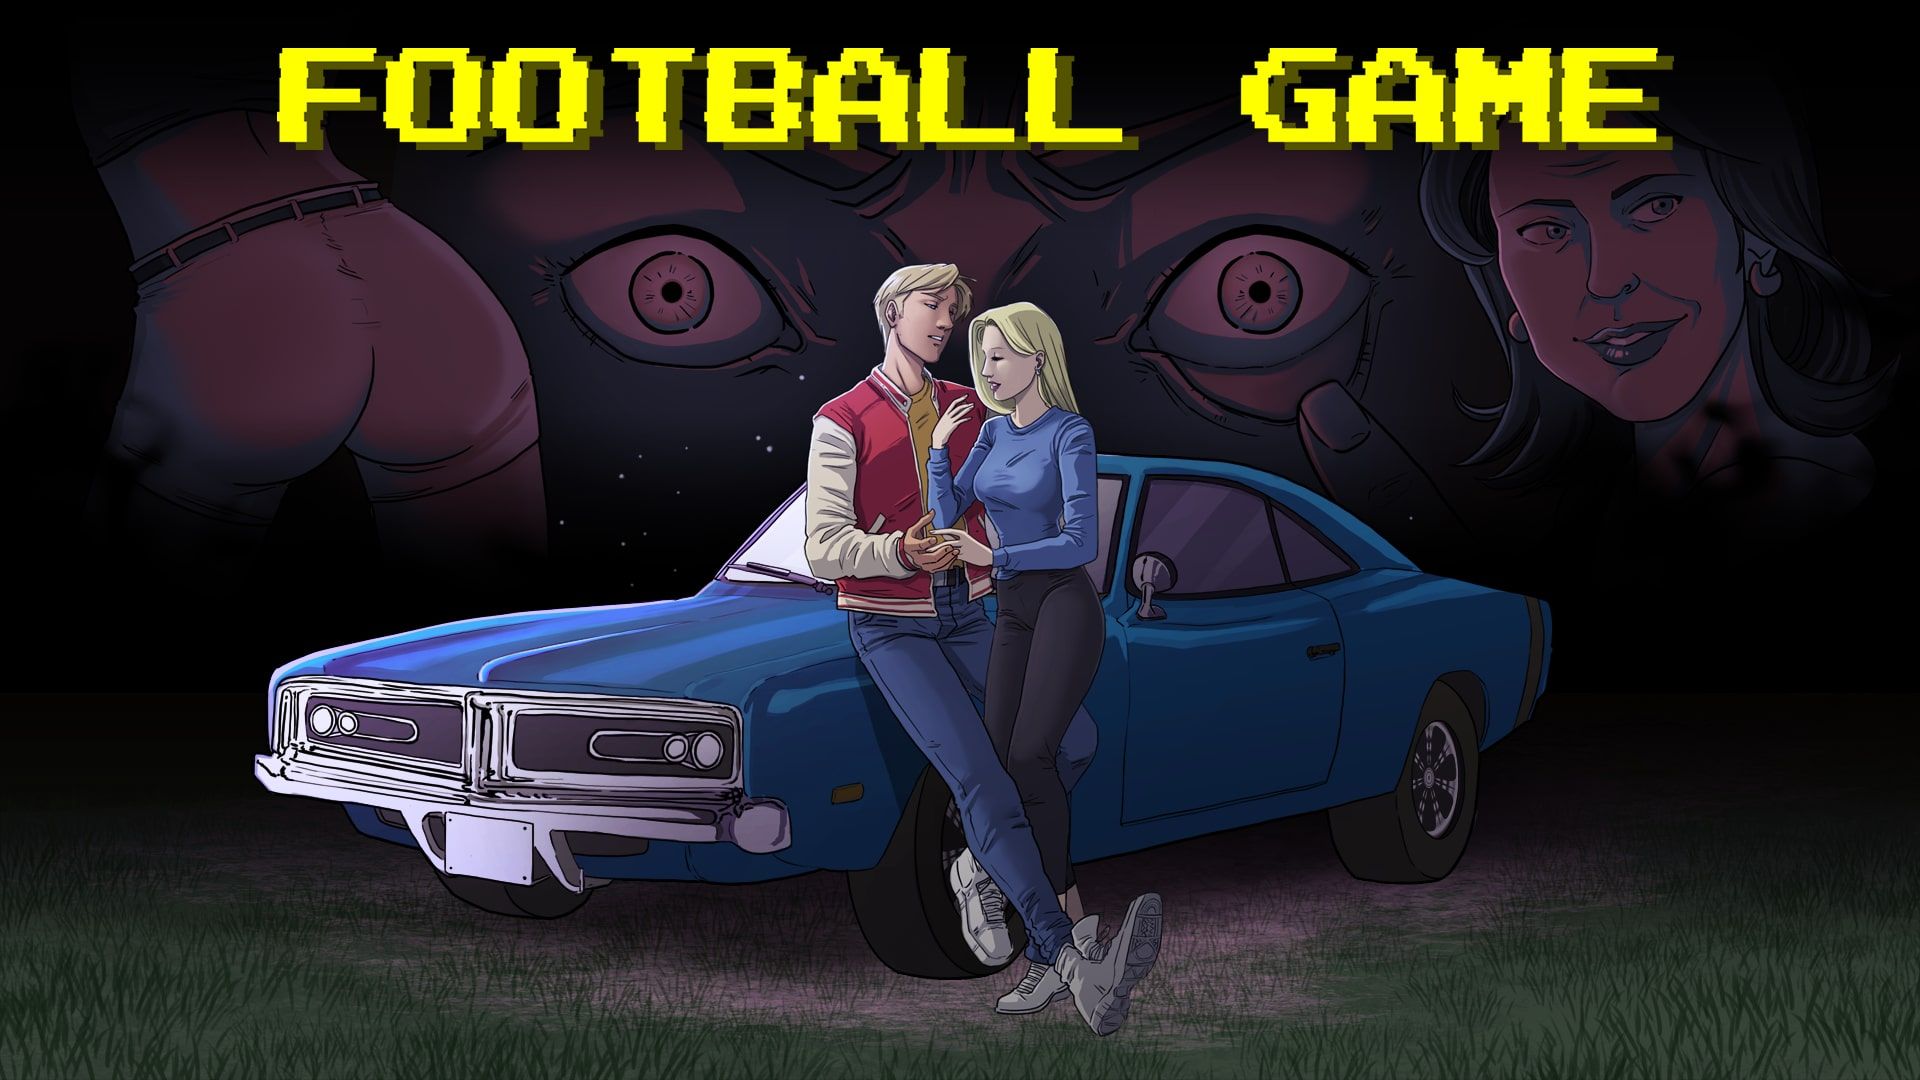 Football Game cover image